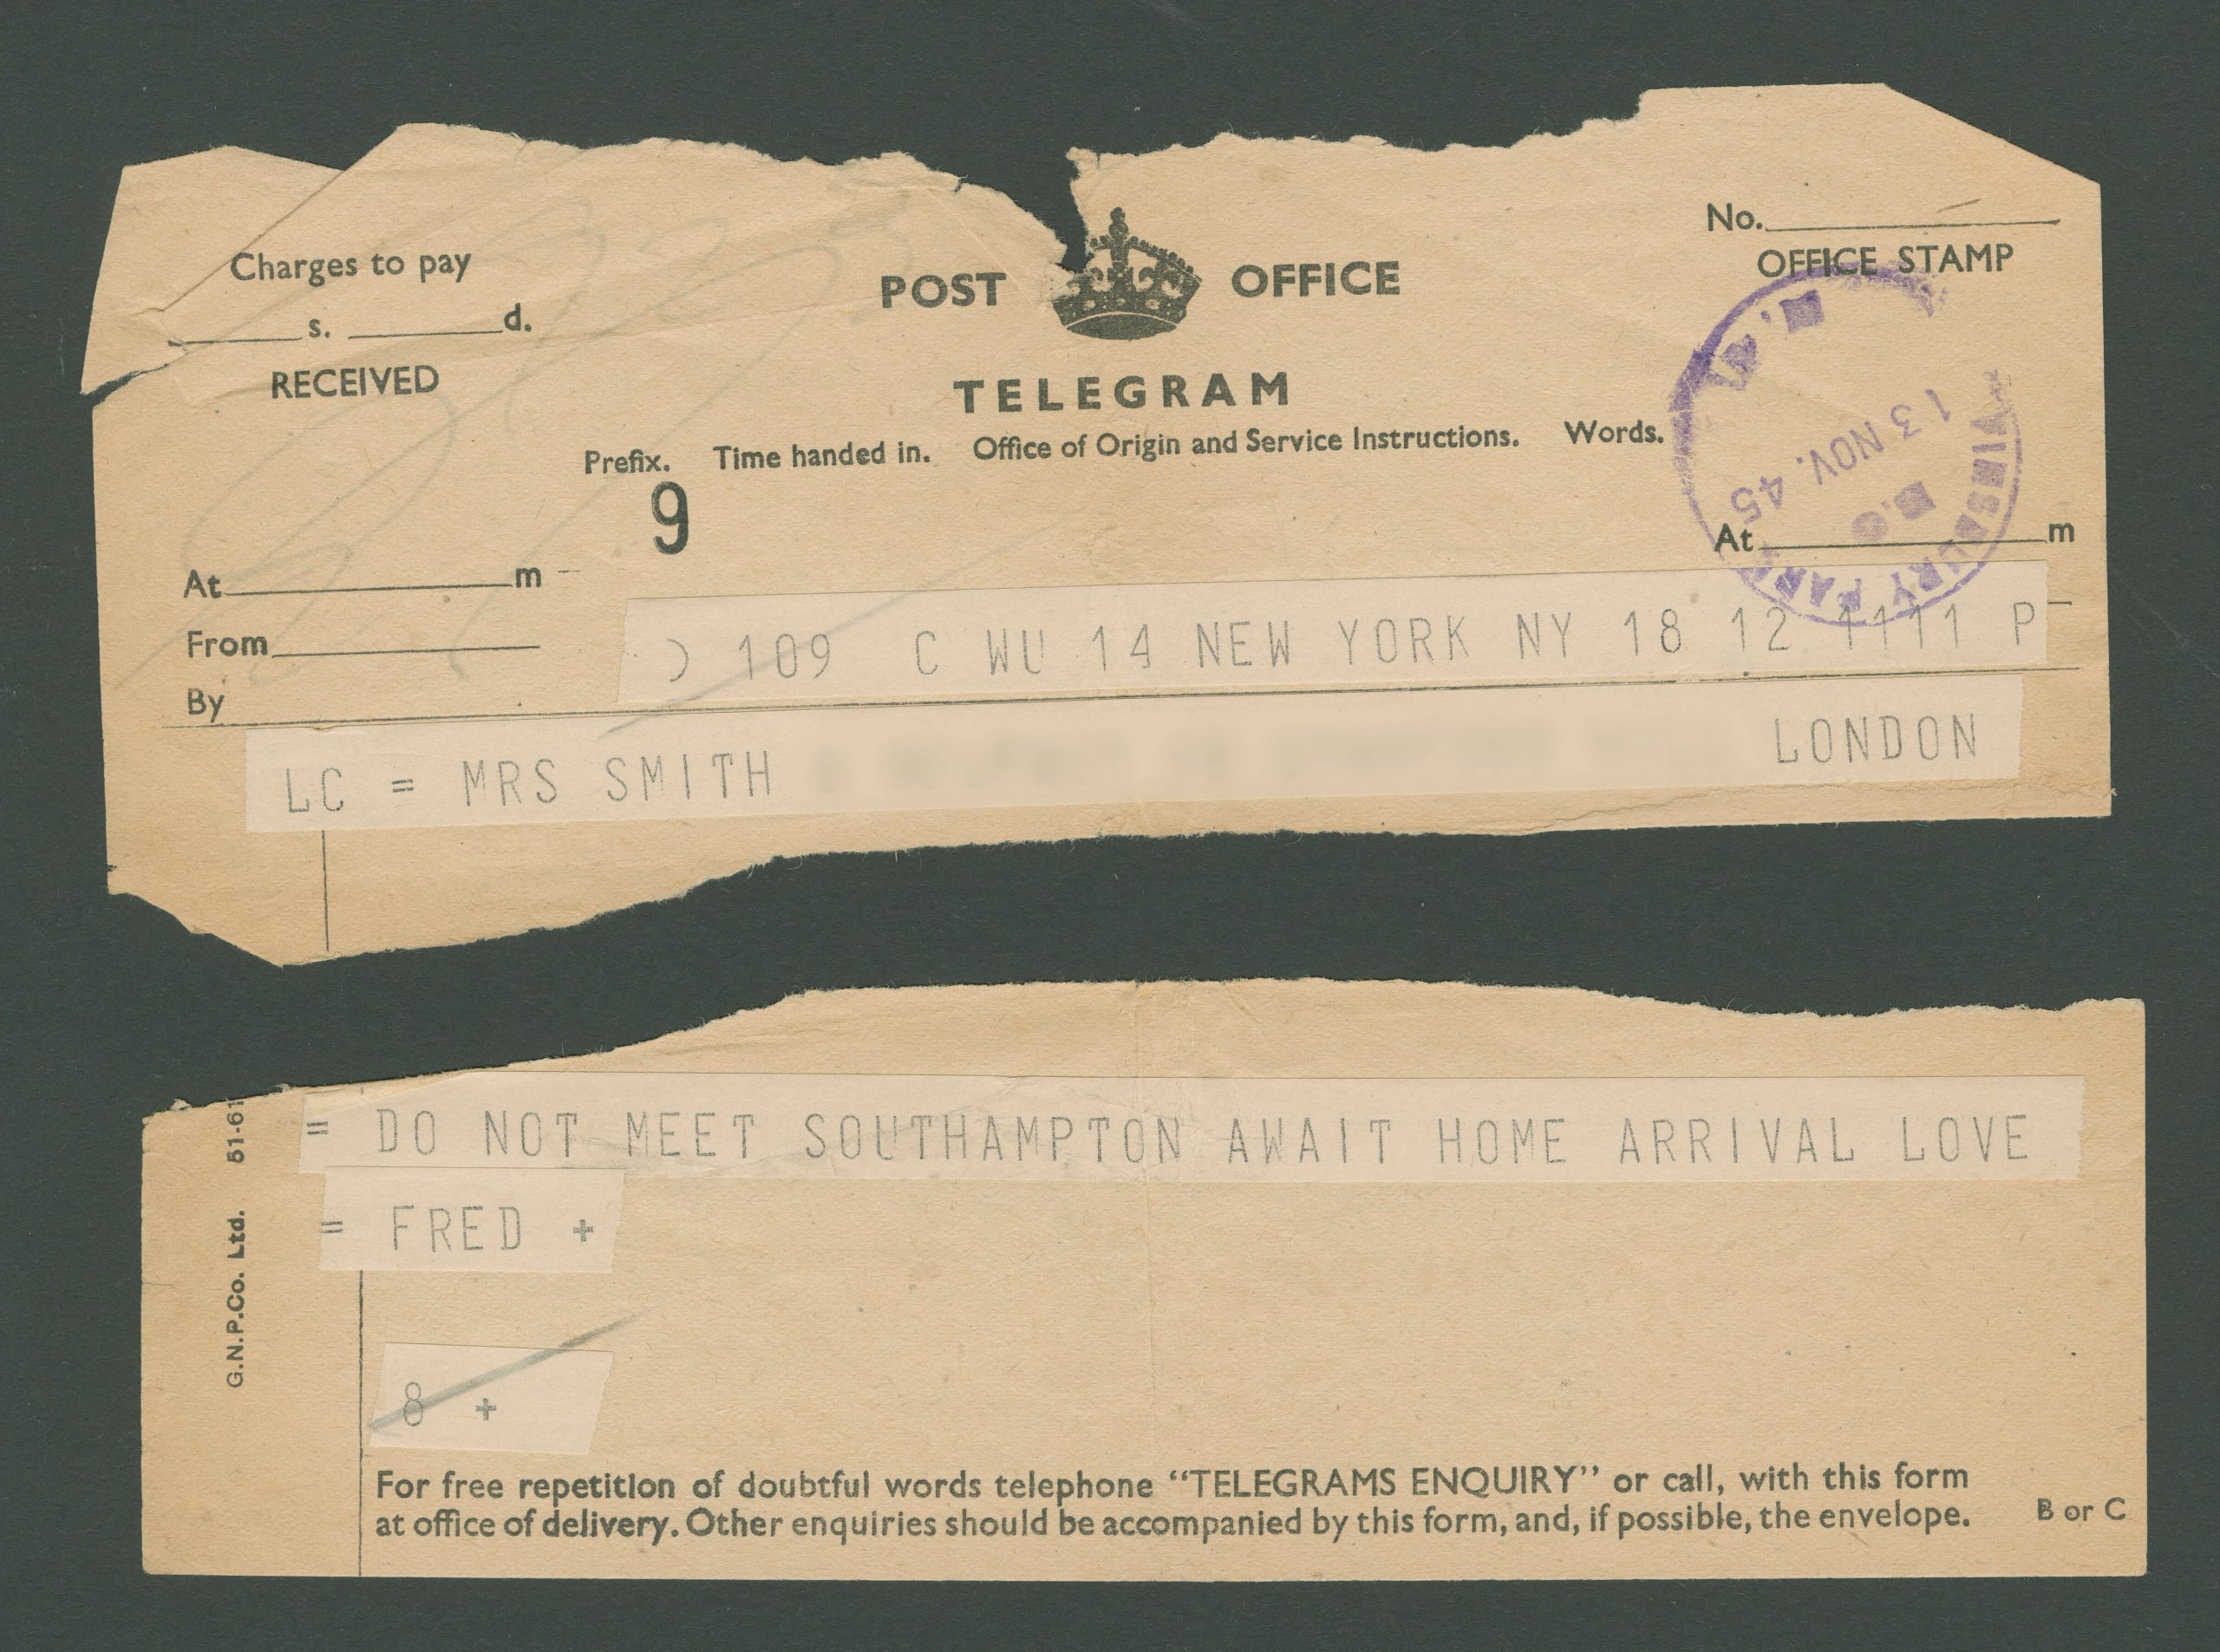 This telegram is in poor condition, it is in two pieces, but it directs Fred's wife to wait for him at home, instead of coming to meet him in Southampton.